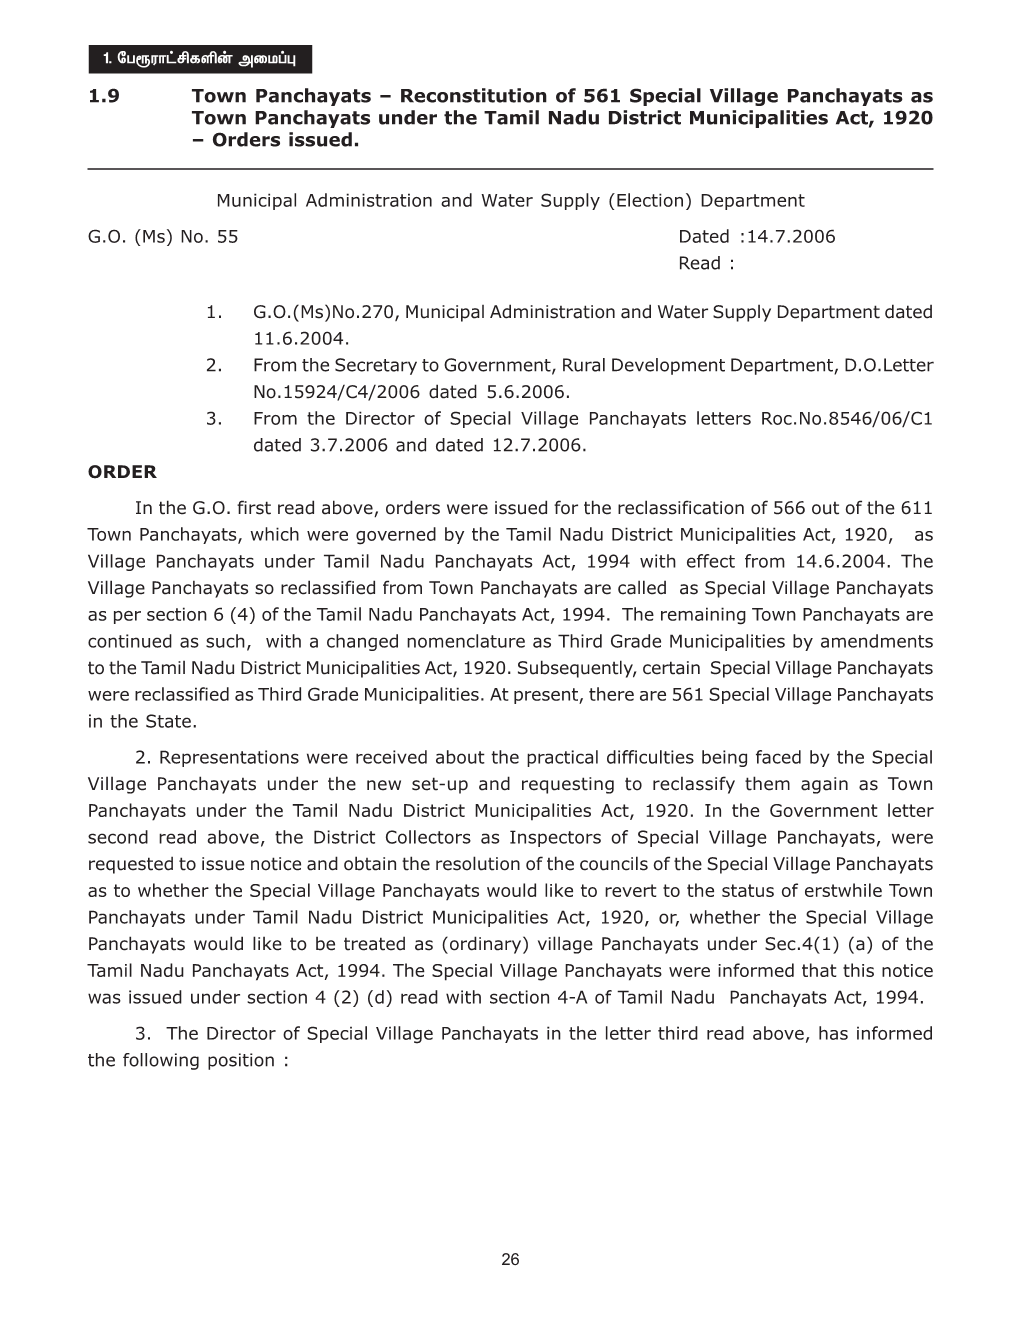 1.9 Town Panchayats – Reconstitution of 561 Special Village Panchayats As Town Panchayats Under the Tamil Nadu District Municipalities Act, 1920 – Orders Issued